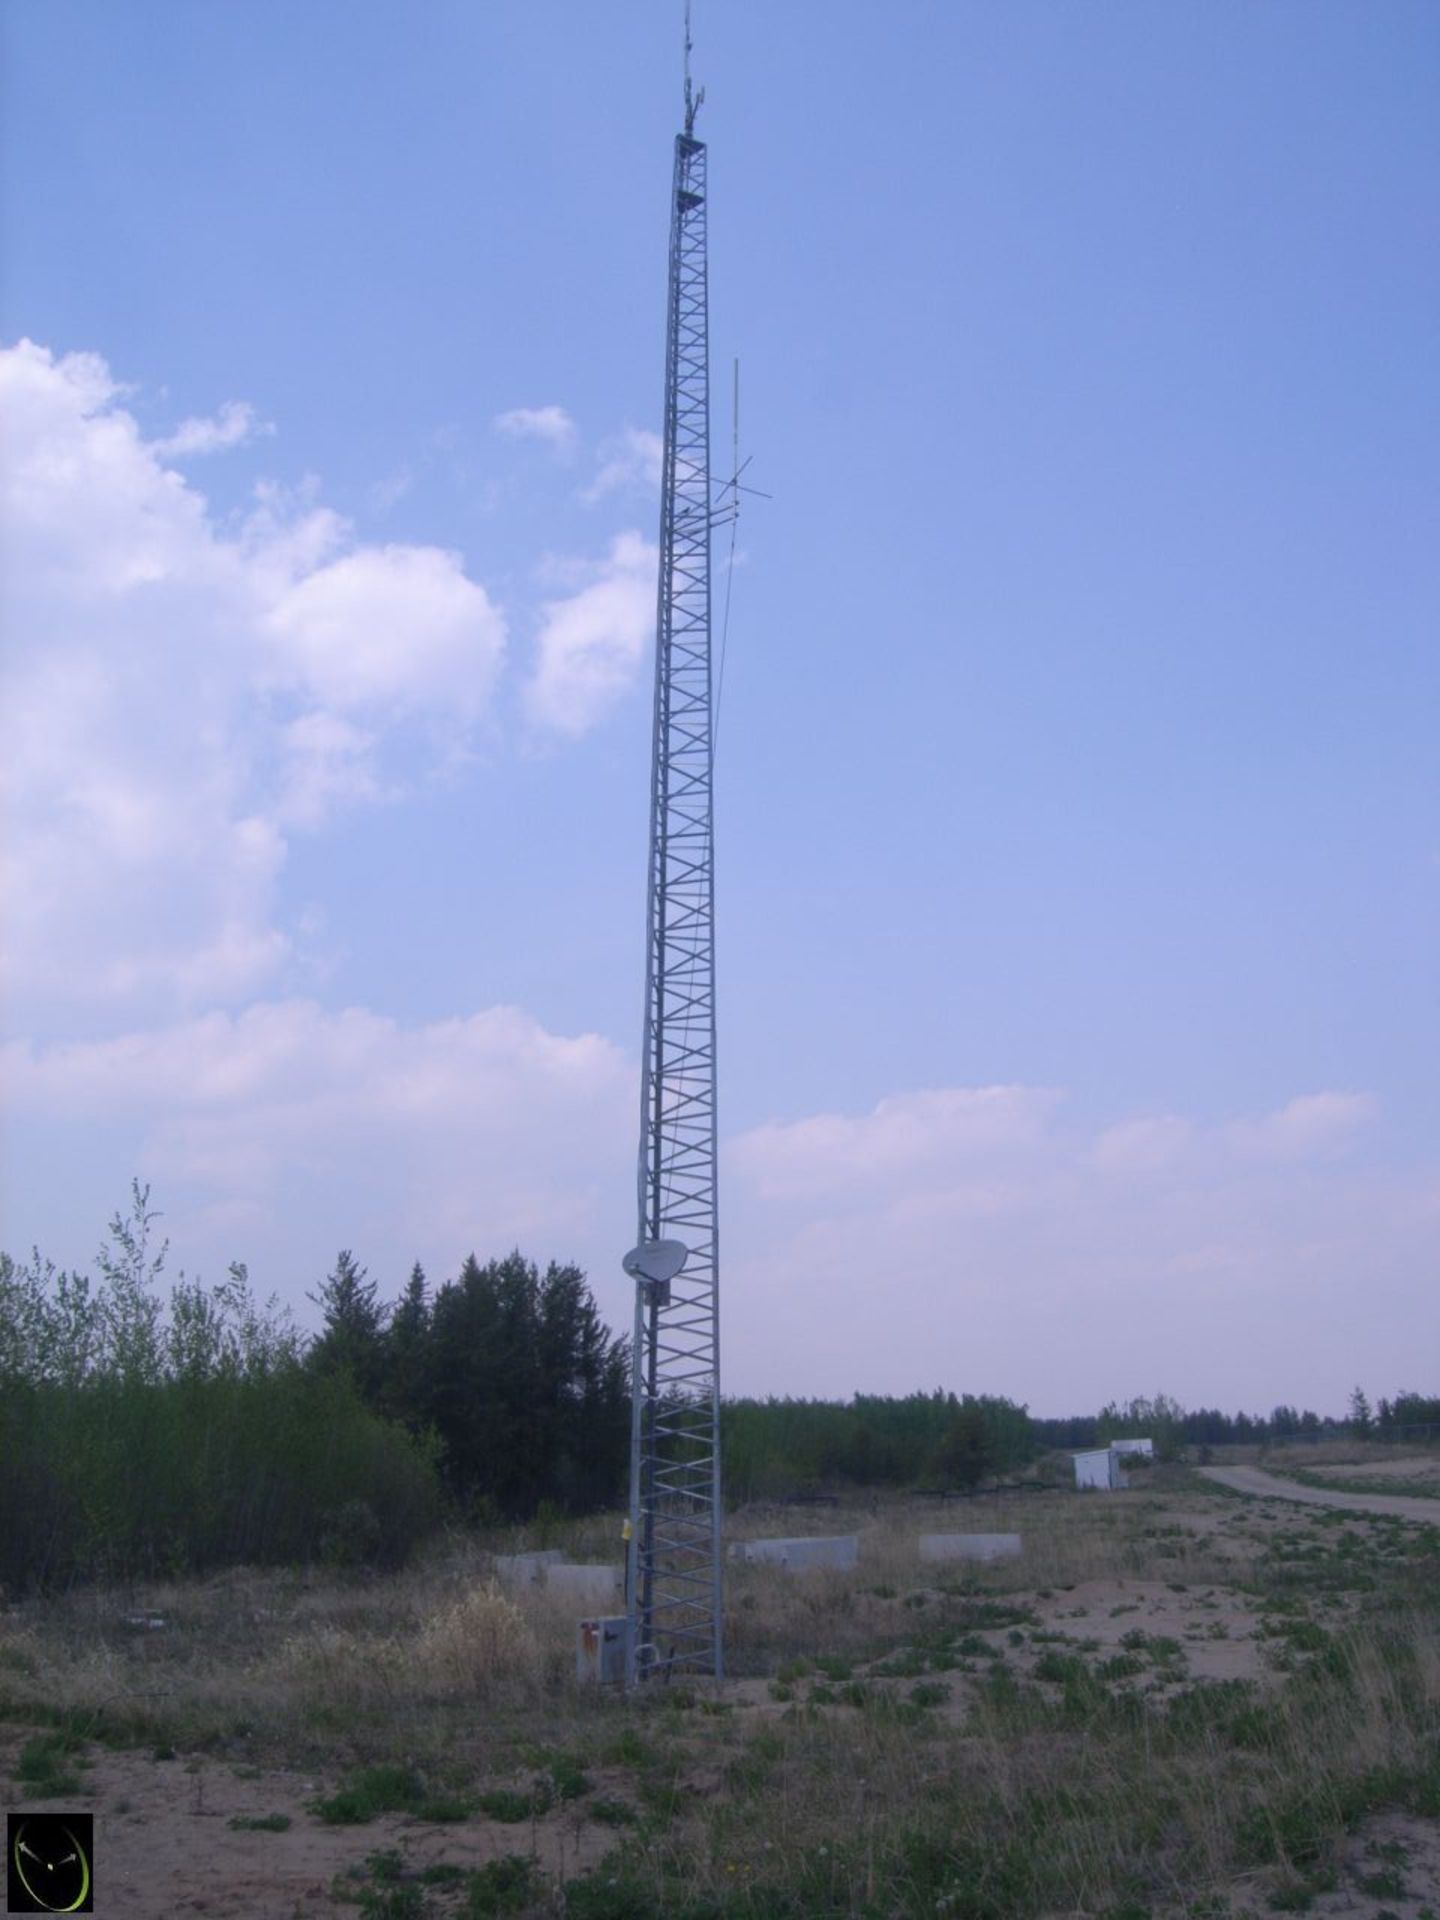 Approx. 60 To 70 Ft. Free Standing Steel Tower w/ Misc. Antennas. - Image 2 of 4